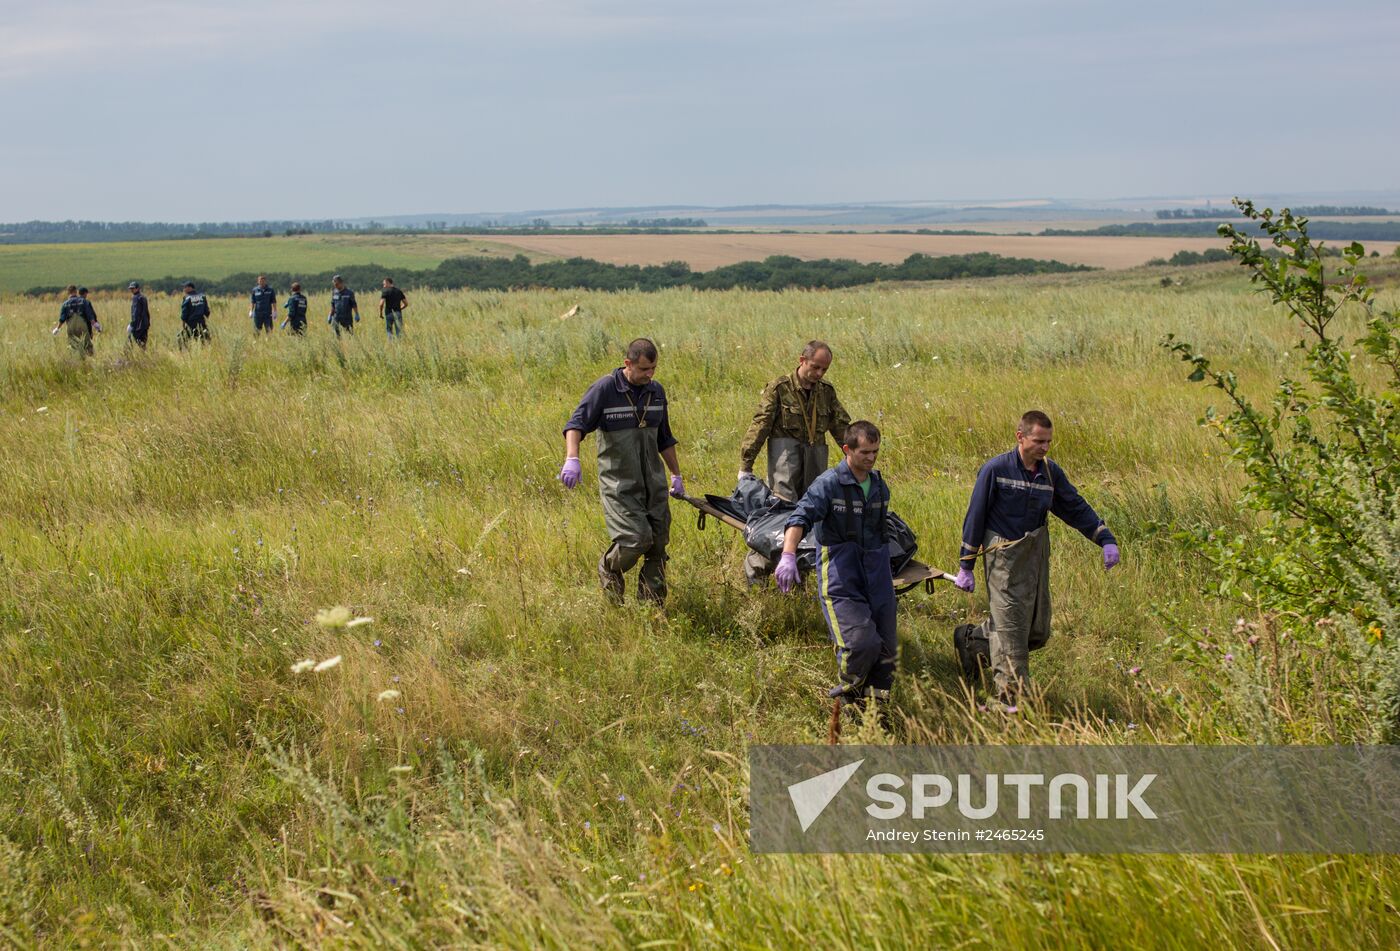 Bodies recovered at Malaysia Airlines Boeing 777 crash site near Shakhtyorsk